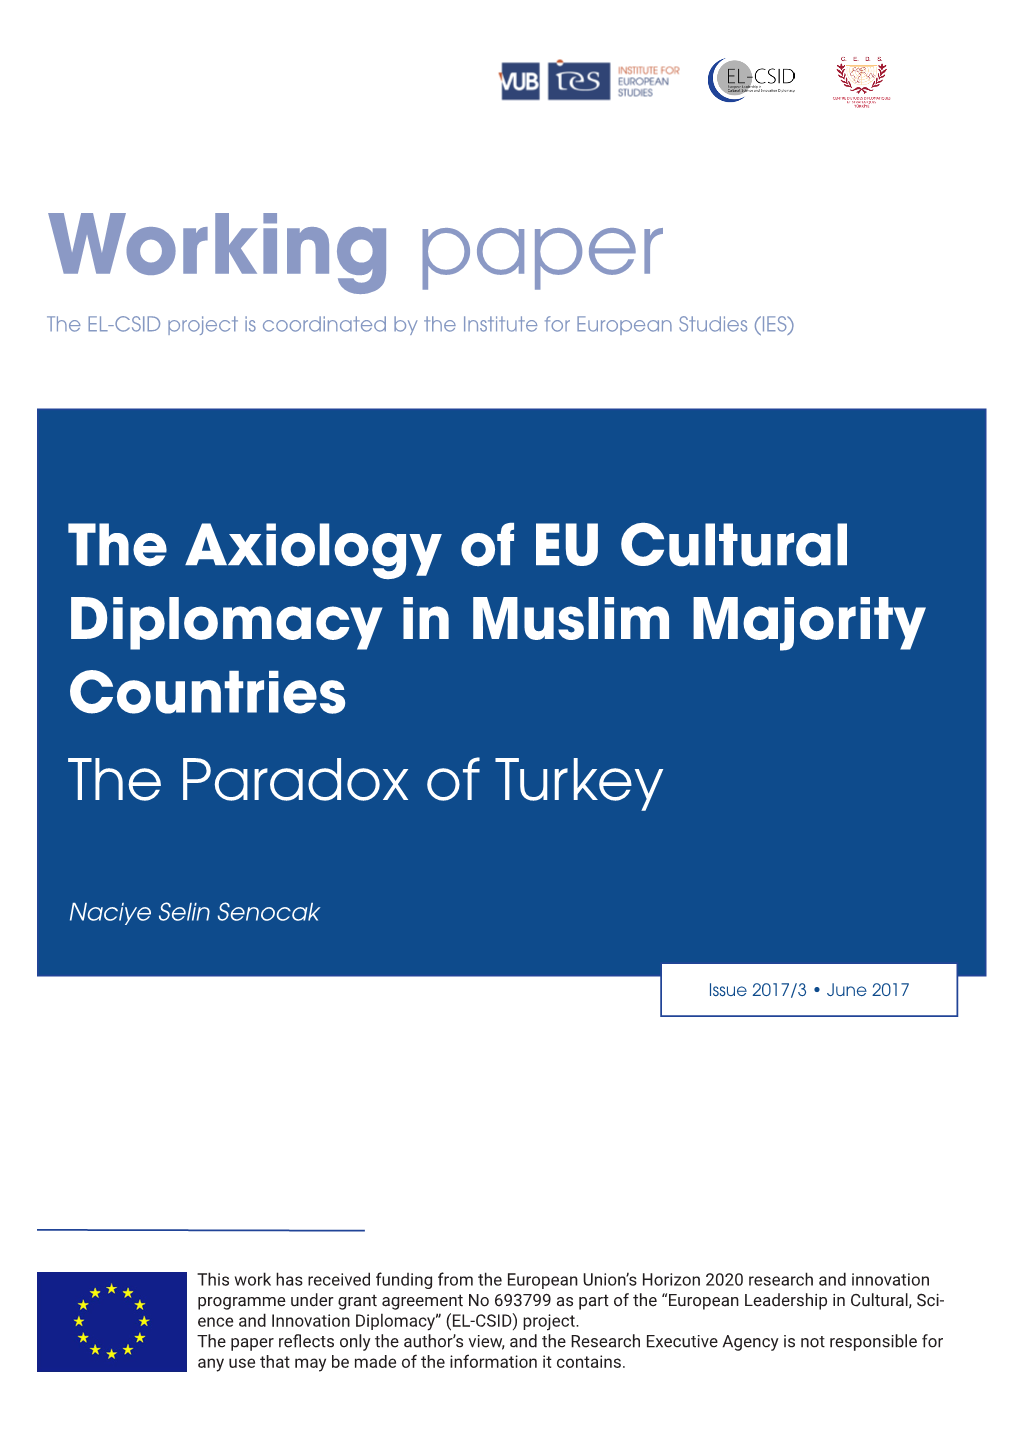 Working Paper the EL-CSID Project Is Coordinated by the Institute for European Studies (IES)